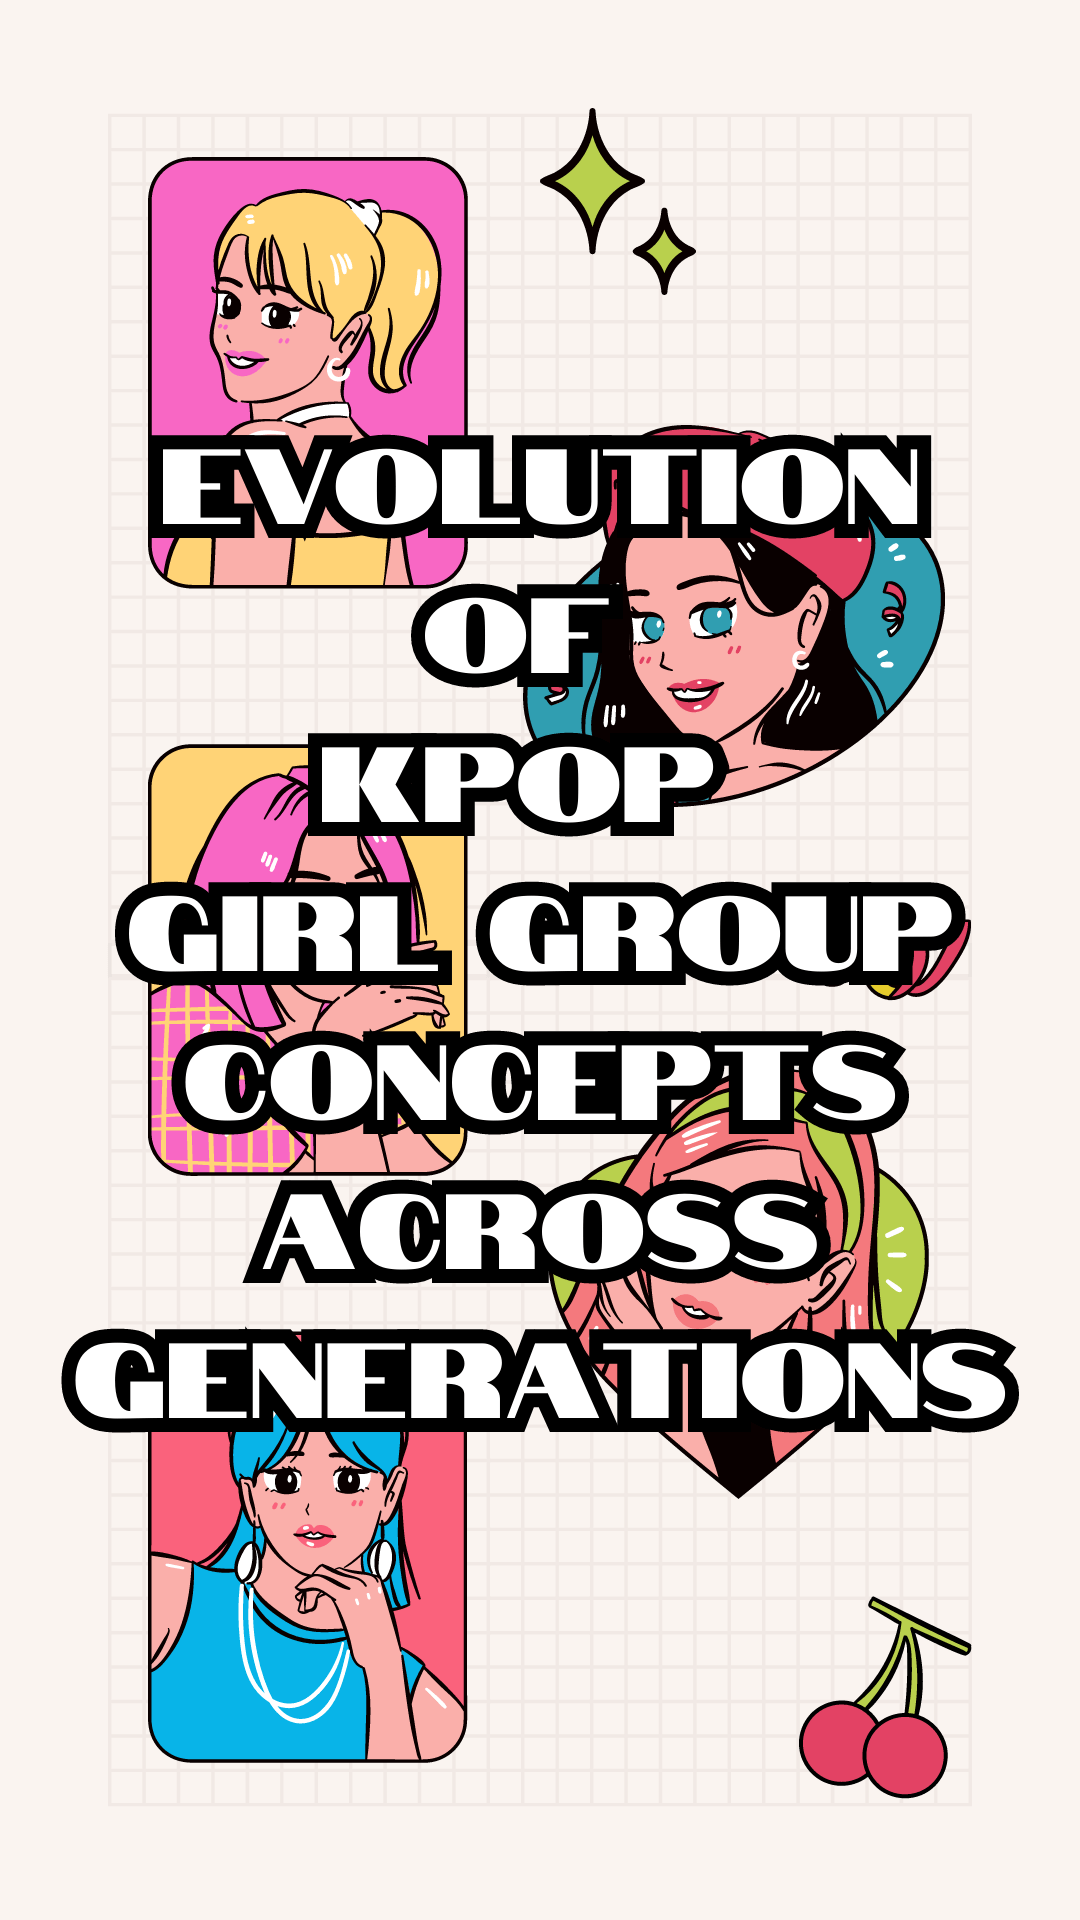 Kpop girl group concepts